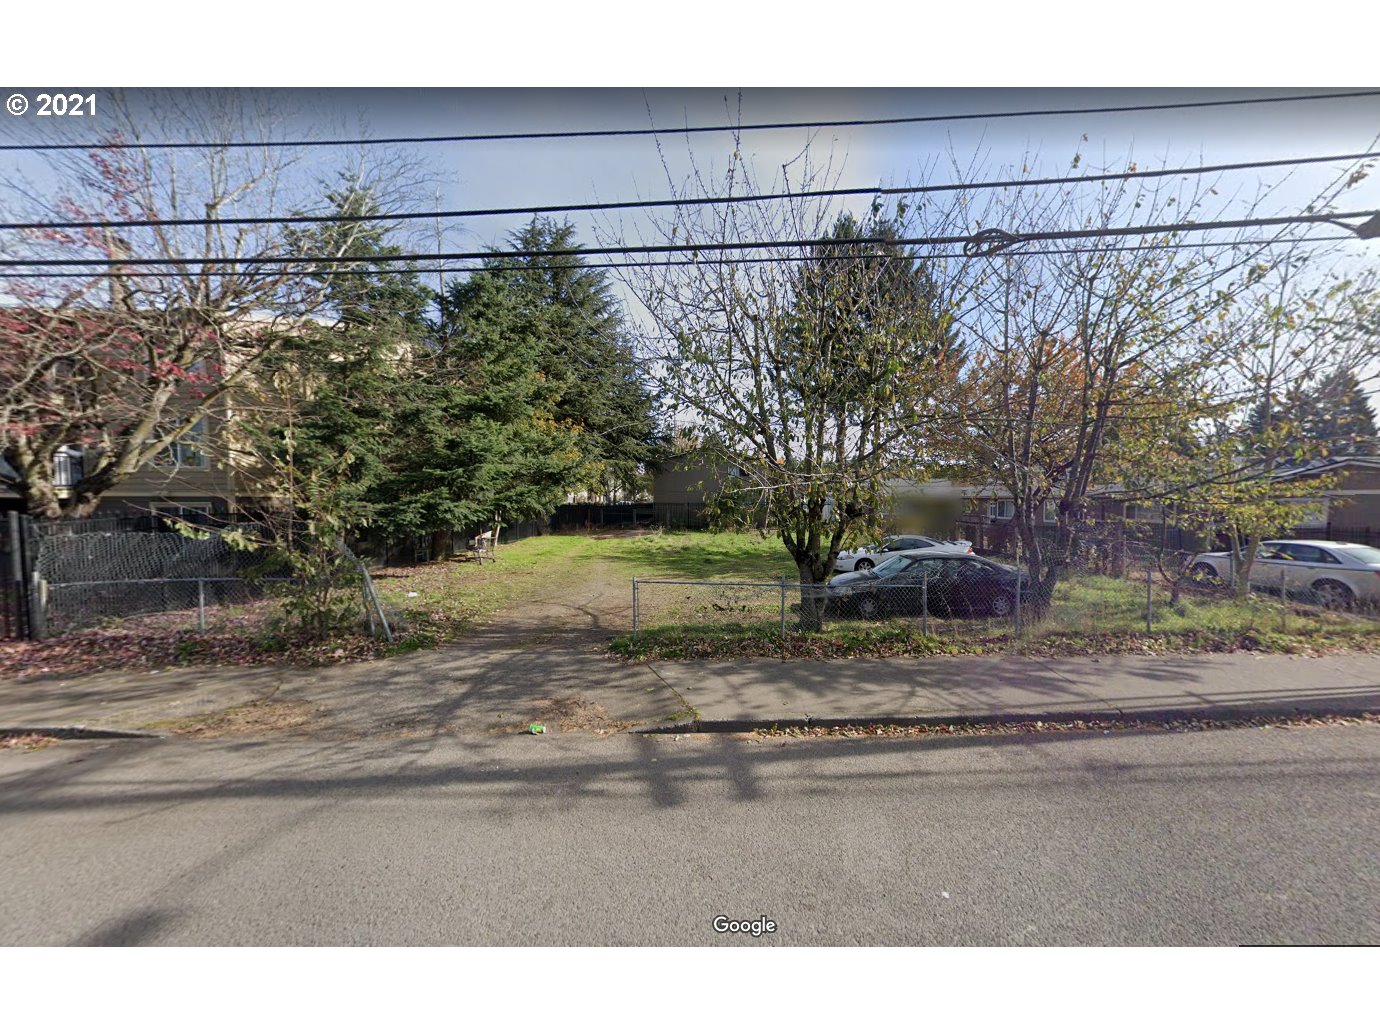 740 SE 190TH AVE (1 of 3)